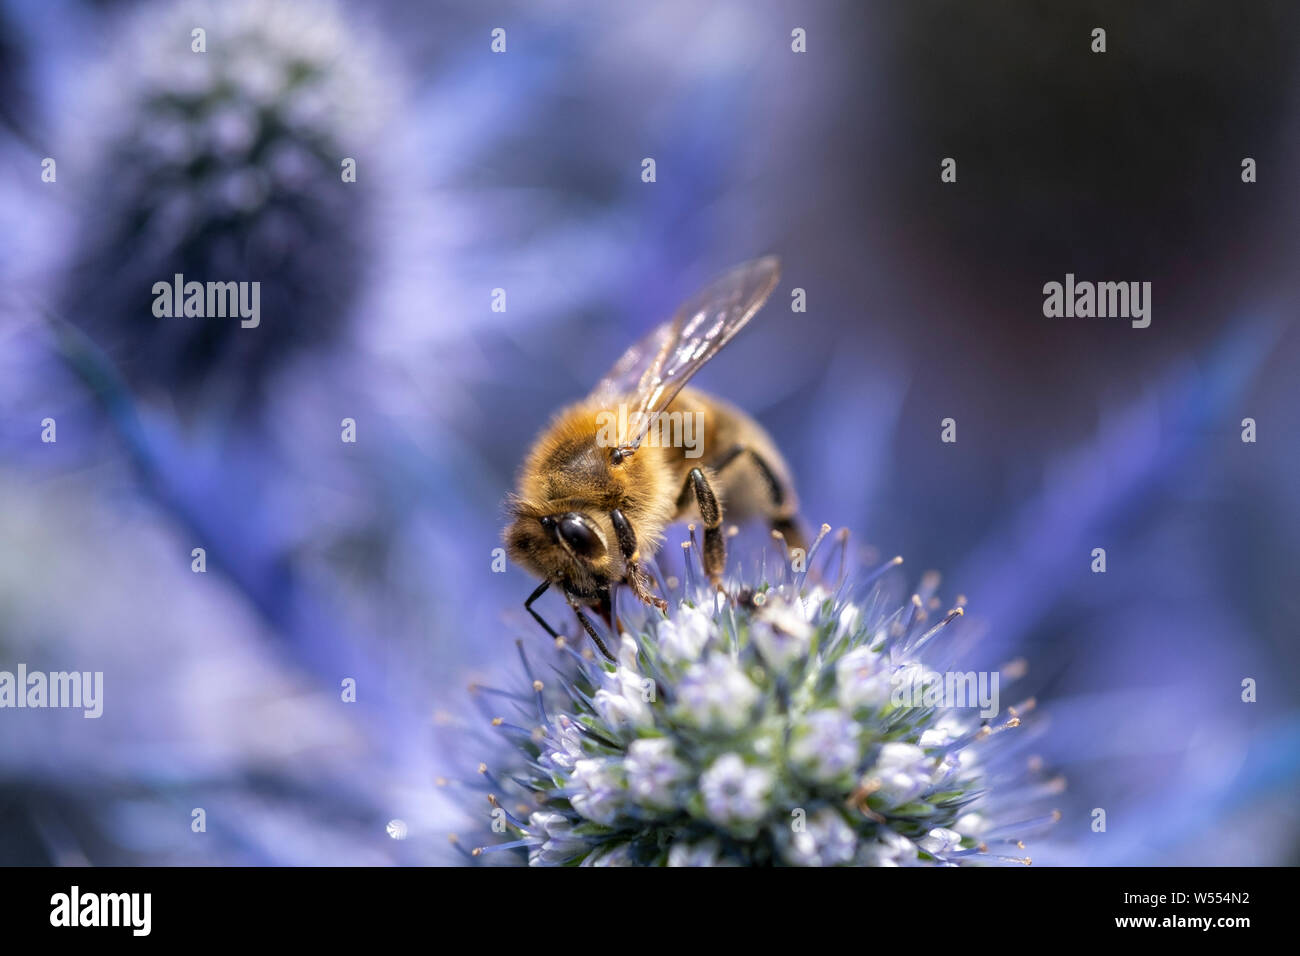 Bee prospecting for pollen in the flower head of a sea holly plant, scientific name is Eryngium Stock Photo